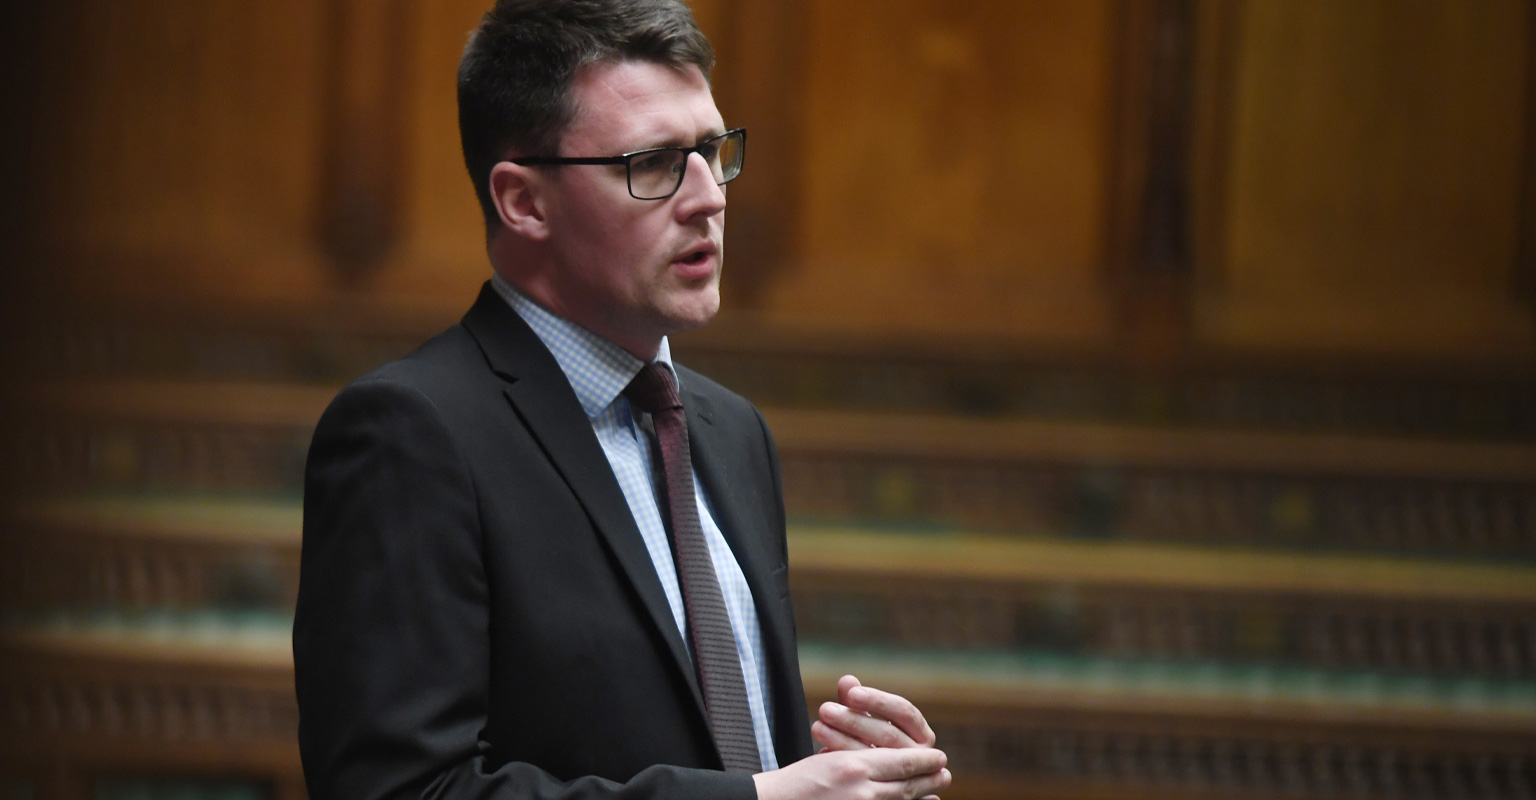 Photograph of David Linden MP speaking in the House of Commons